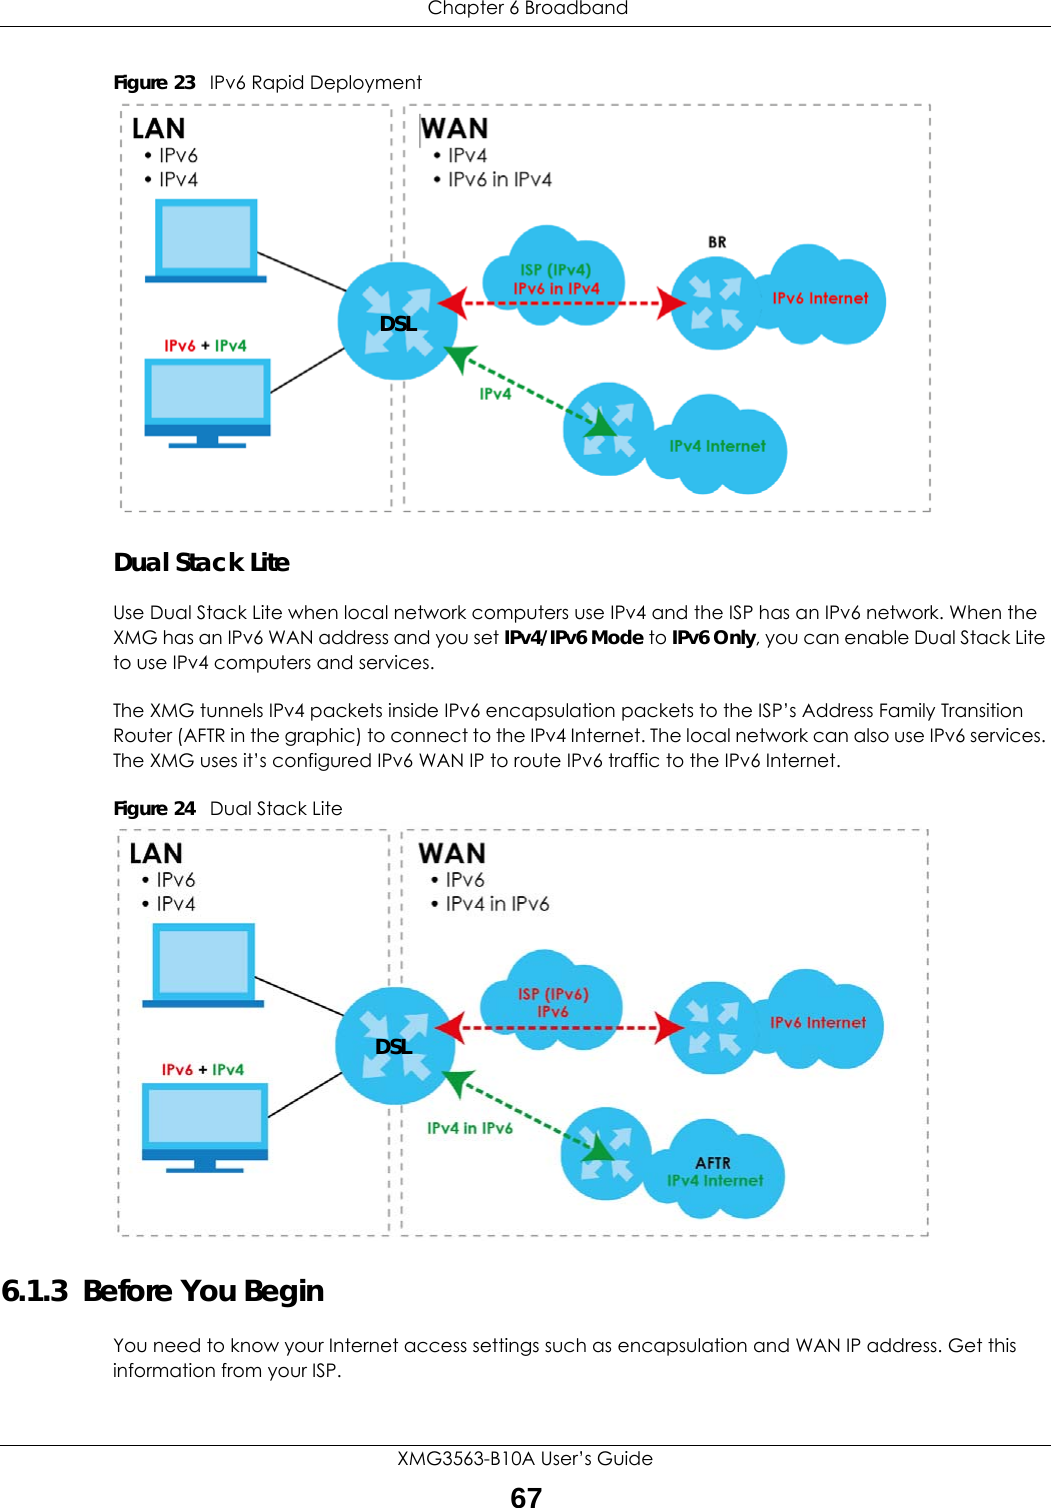  Chapter 6 BroadbandXMG3563-B10A User’s Guide67Figure 23   IPv6 Rapid DeploymentDual Stack Lite   Use Dual Stack Lite when local network computers use IPv4 and the ISP has an IPv6 network. When the XMG has an IPv6 WAN address and you set IPv4/IPv6 Mode to IPv6 Only, you can enable Dual Stack Lite to use IPv4 computers and services. The XMG tunnels IPv4 packets inside IPv6 encapsulation packets to the ISP’s Address Family Transition Router (AFTR in the graphic) to connect to the IPv4 Internet. The local network can also use IPv6 services. The XMG uses it’s configured IPv6 WAN IP to route IPv6 traffic to the IPv6 Internet.Figure 24   Dual Stack Lite6.1.3  Before You BeginYou need to know your Internet access settings such as encapsulation and WAN IP address. Get this information from your ISP.DSLDSL